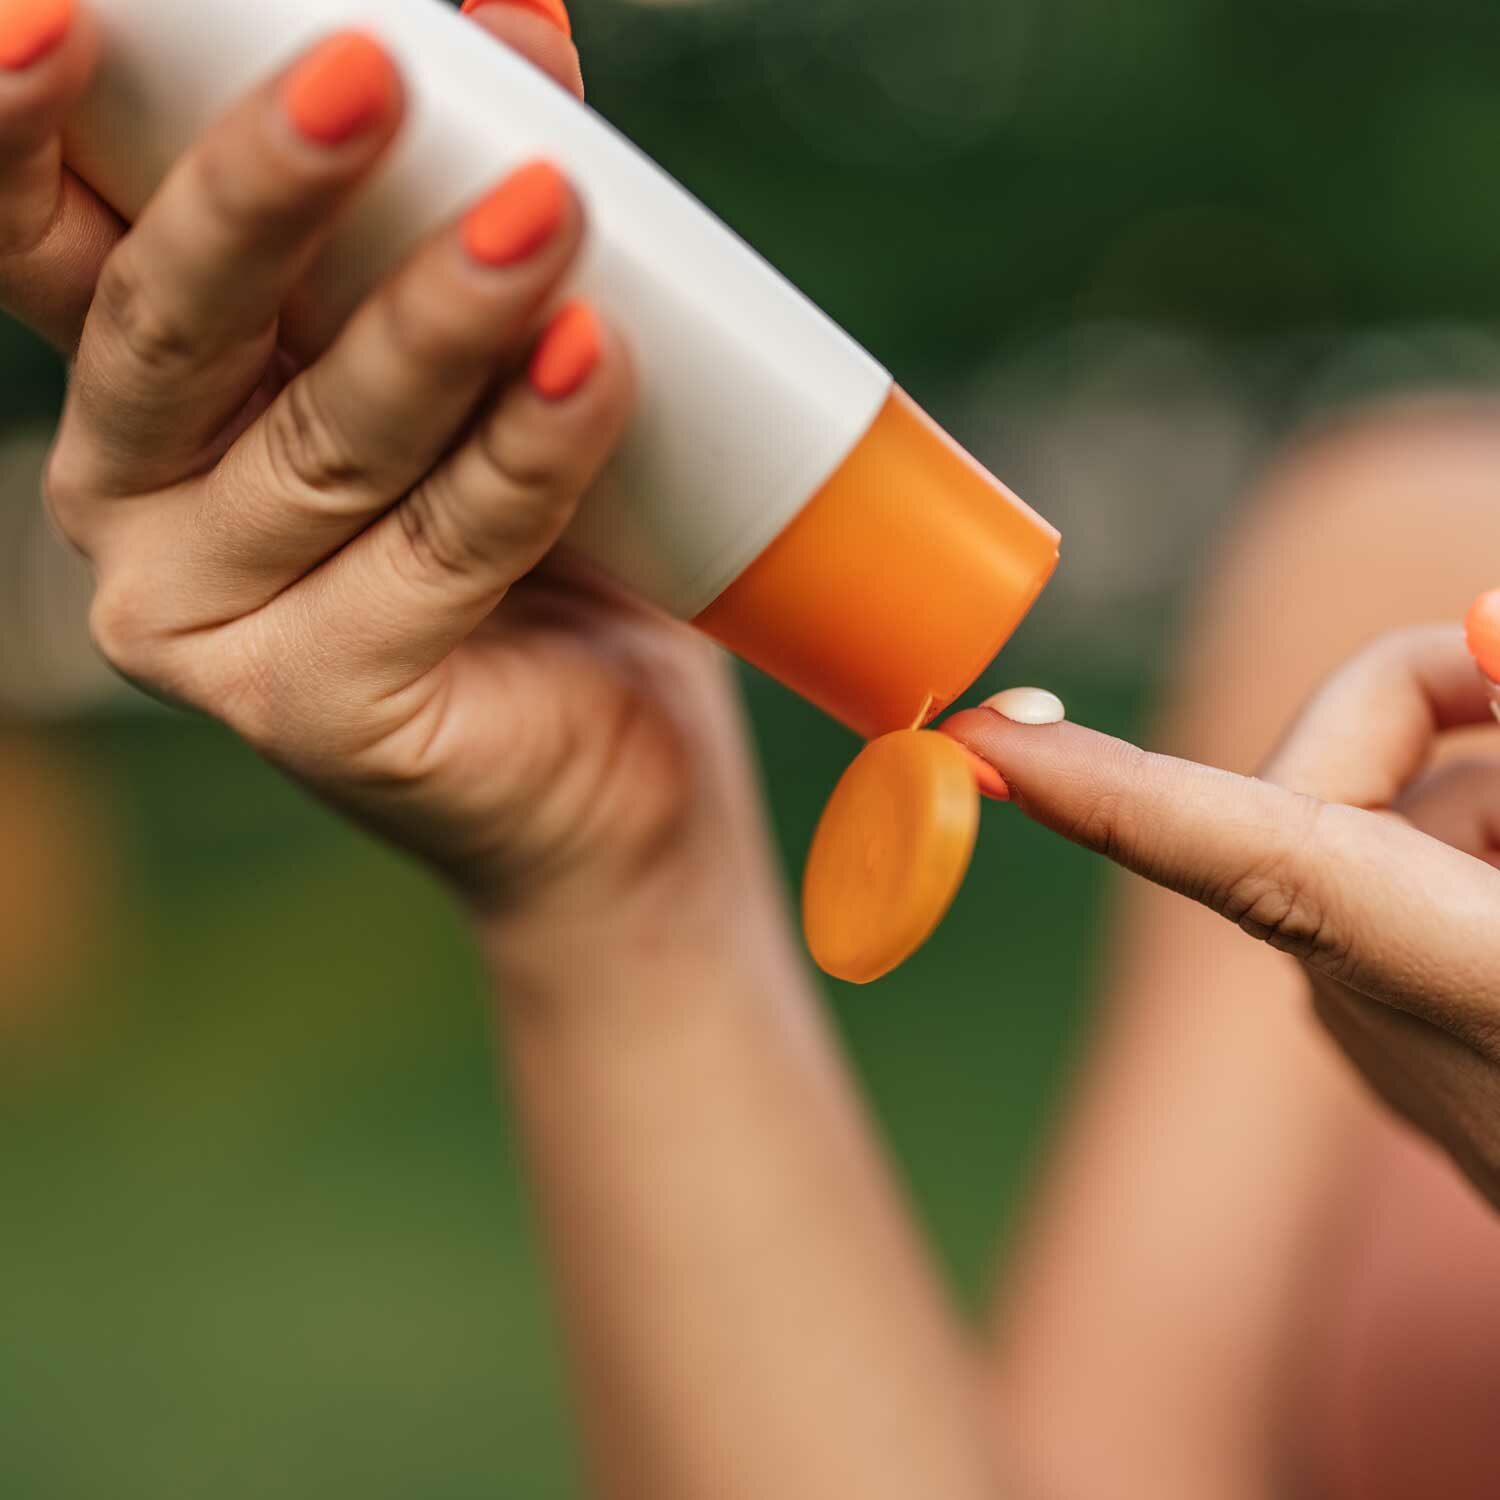 Protecting Your Sunny Side Up A Look at FDA’s Regulation of Sunscreen